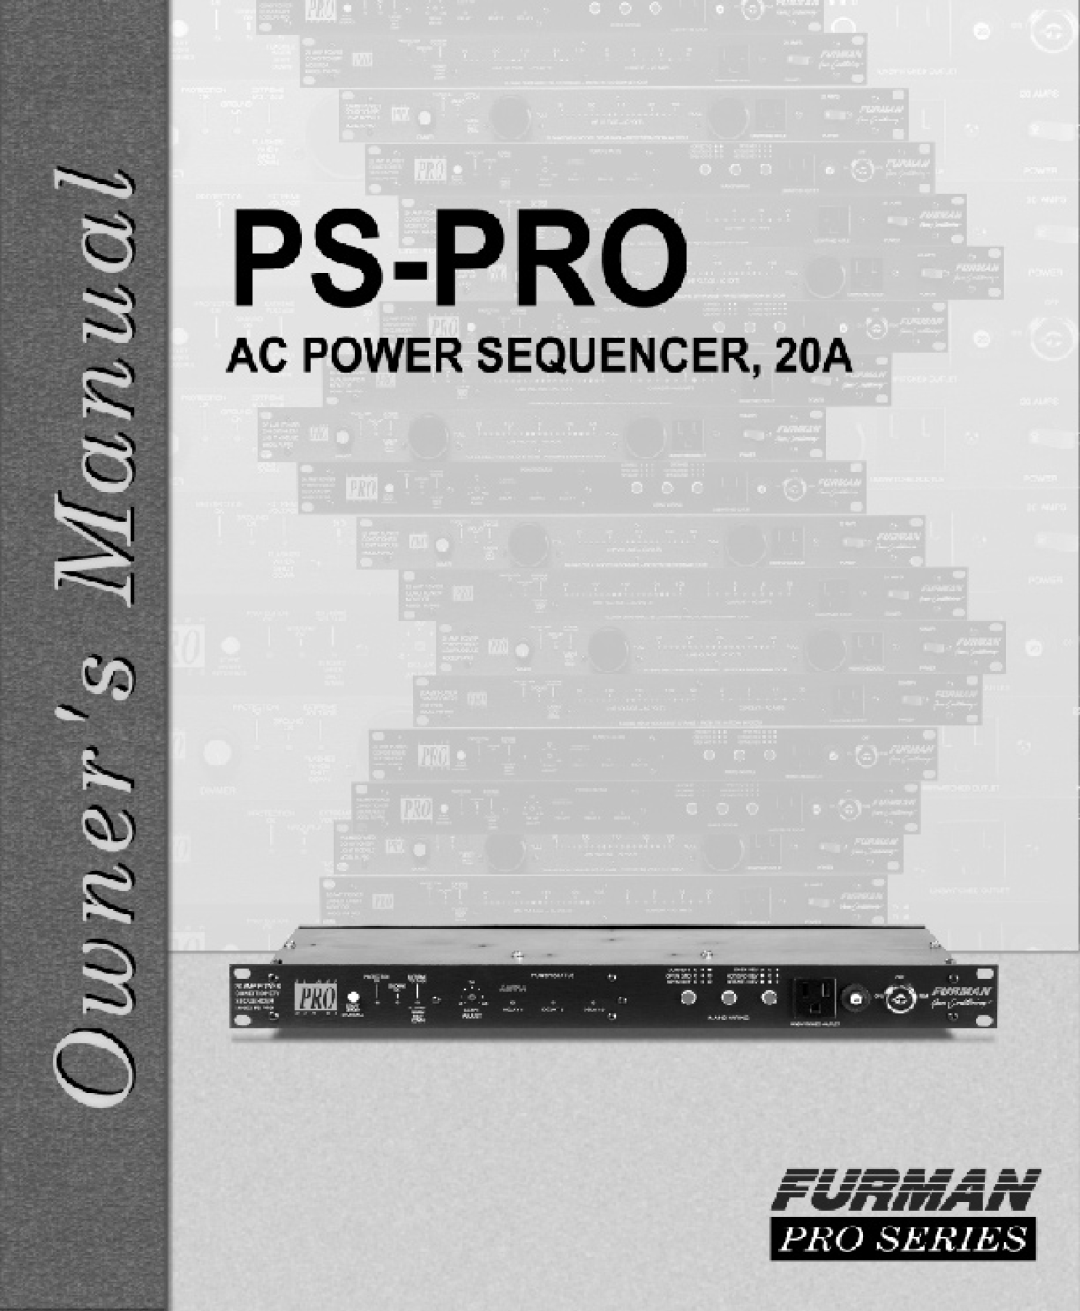 Furman Sound PS-PRO manual Ps - Pro - Power Conditioner/Sequencer 